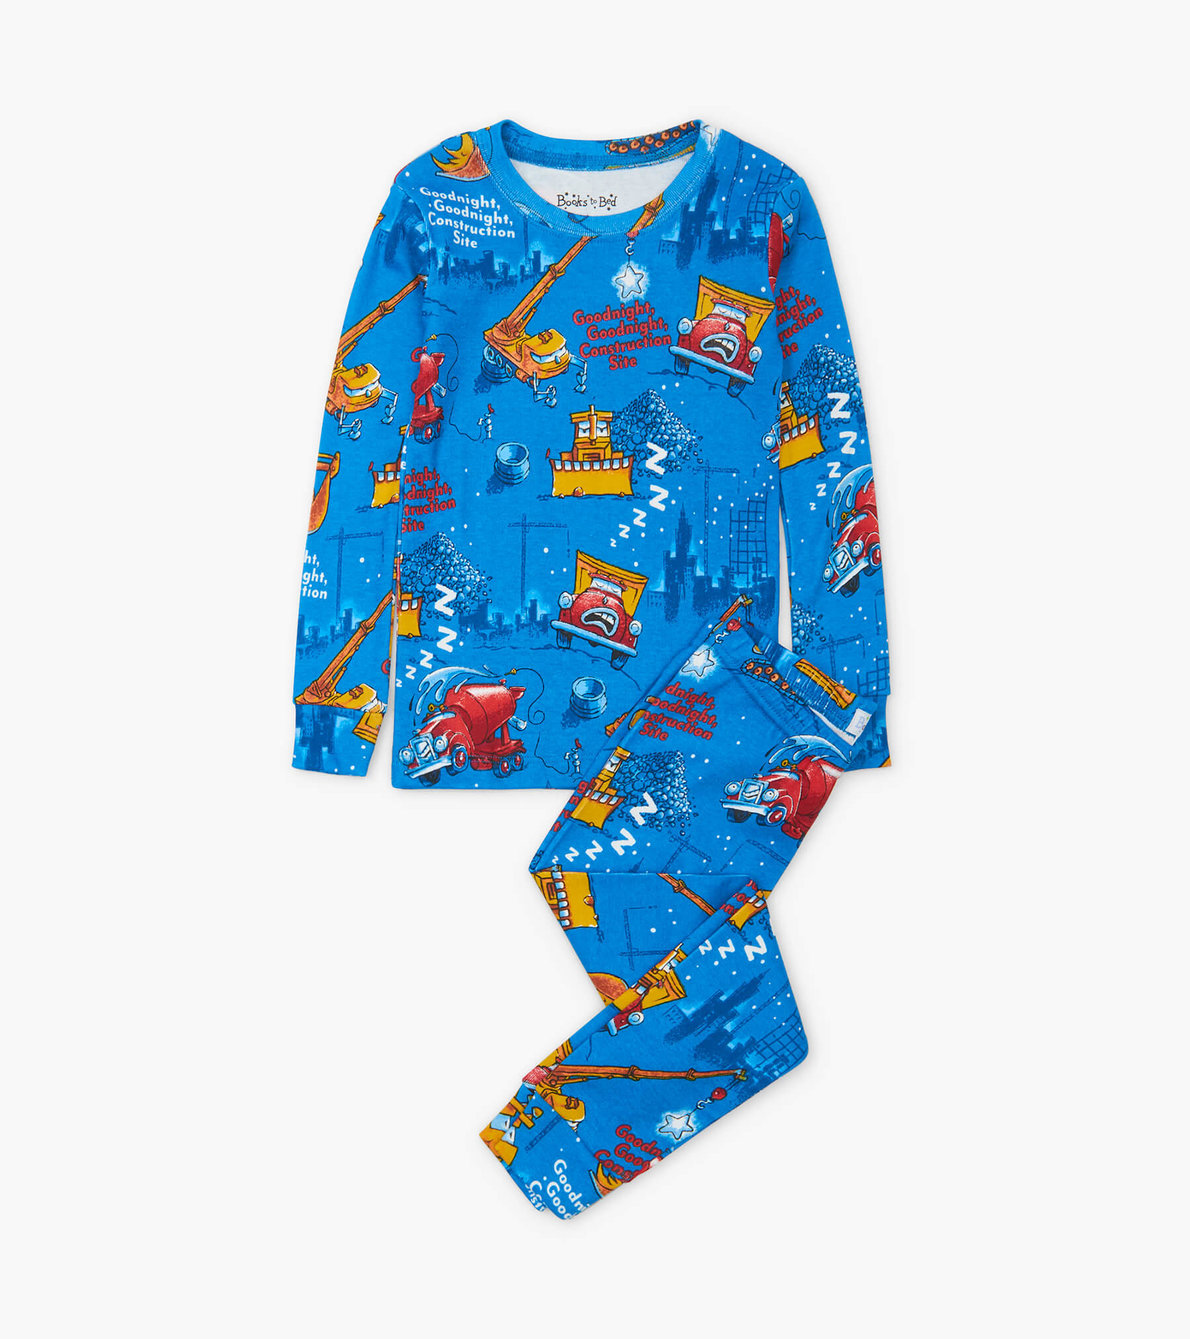 View larger image of Goodnight, Goodnight, Construction Site Pajama Set